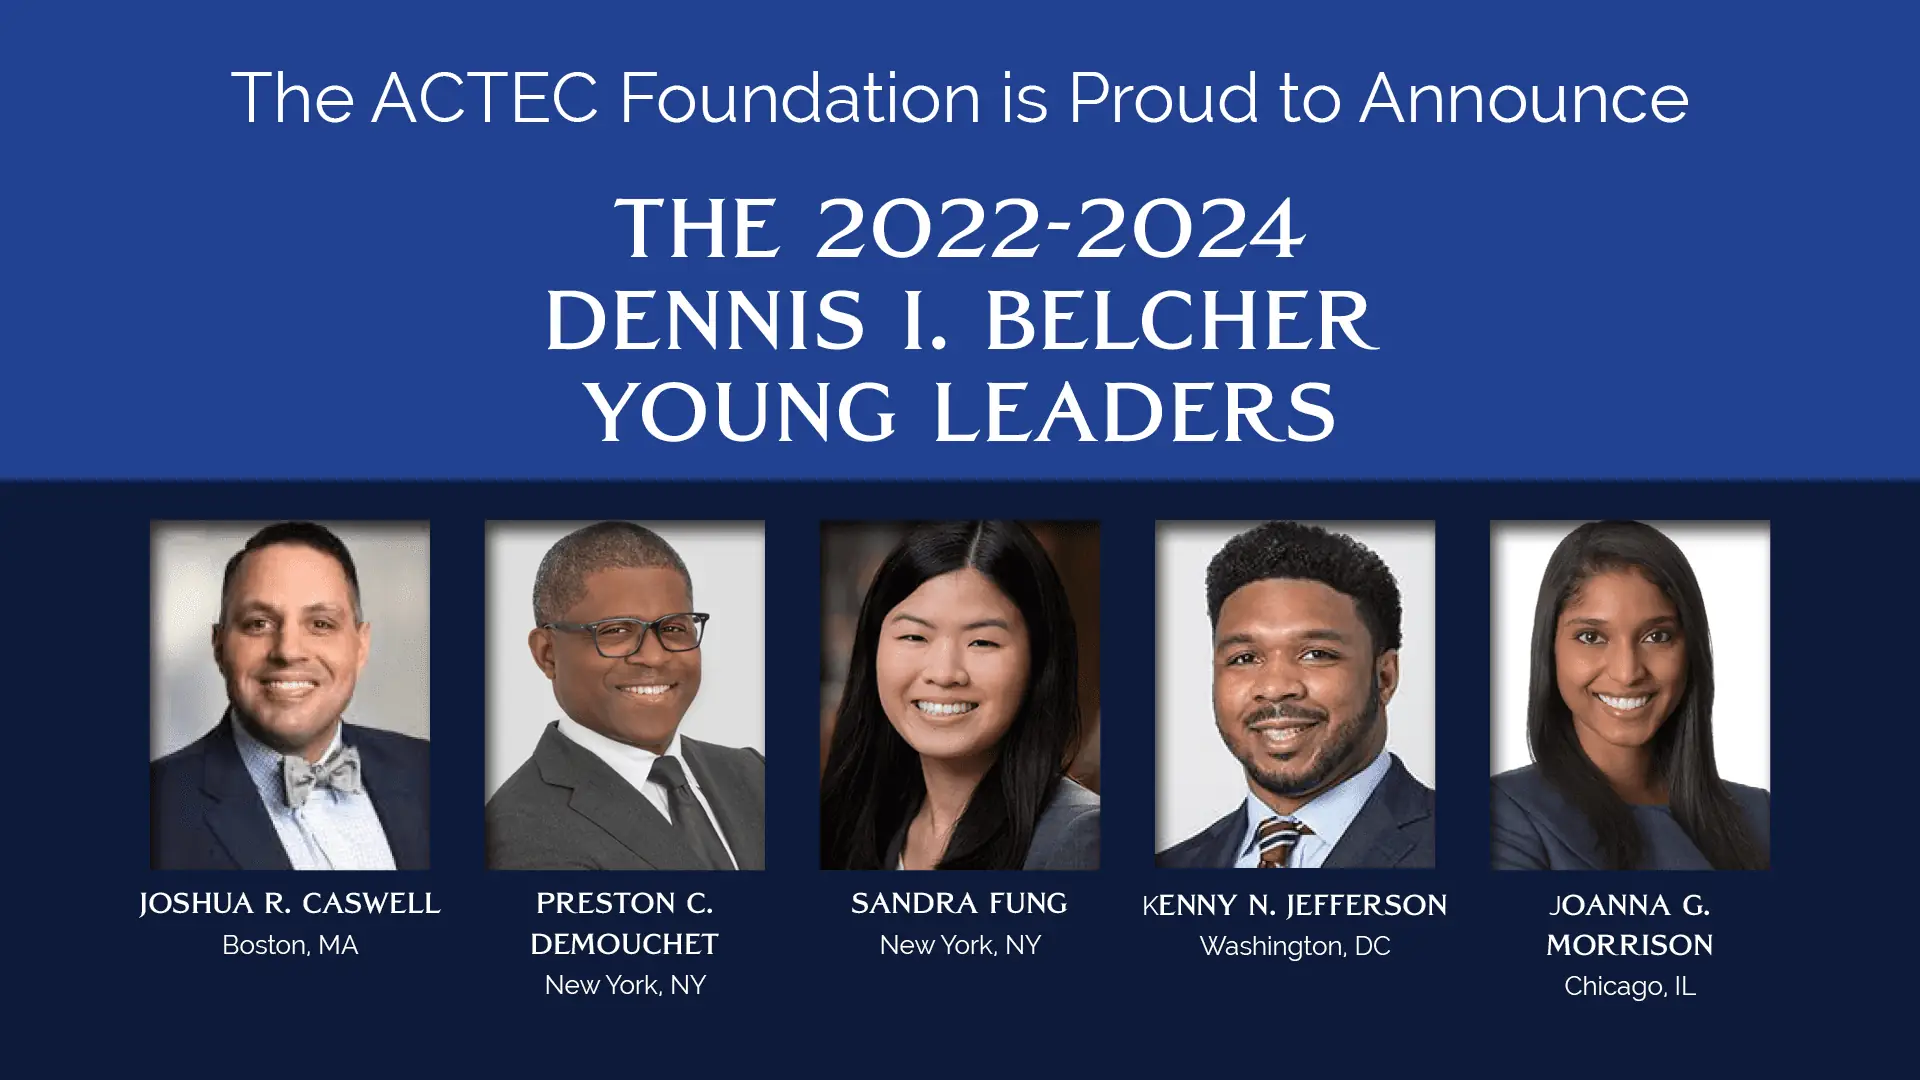 The ACTEC Foundation Announces the 2022-2024 Dennis I. Belcher Young Leaders